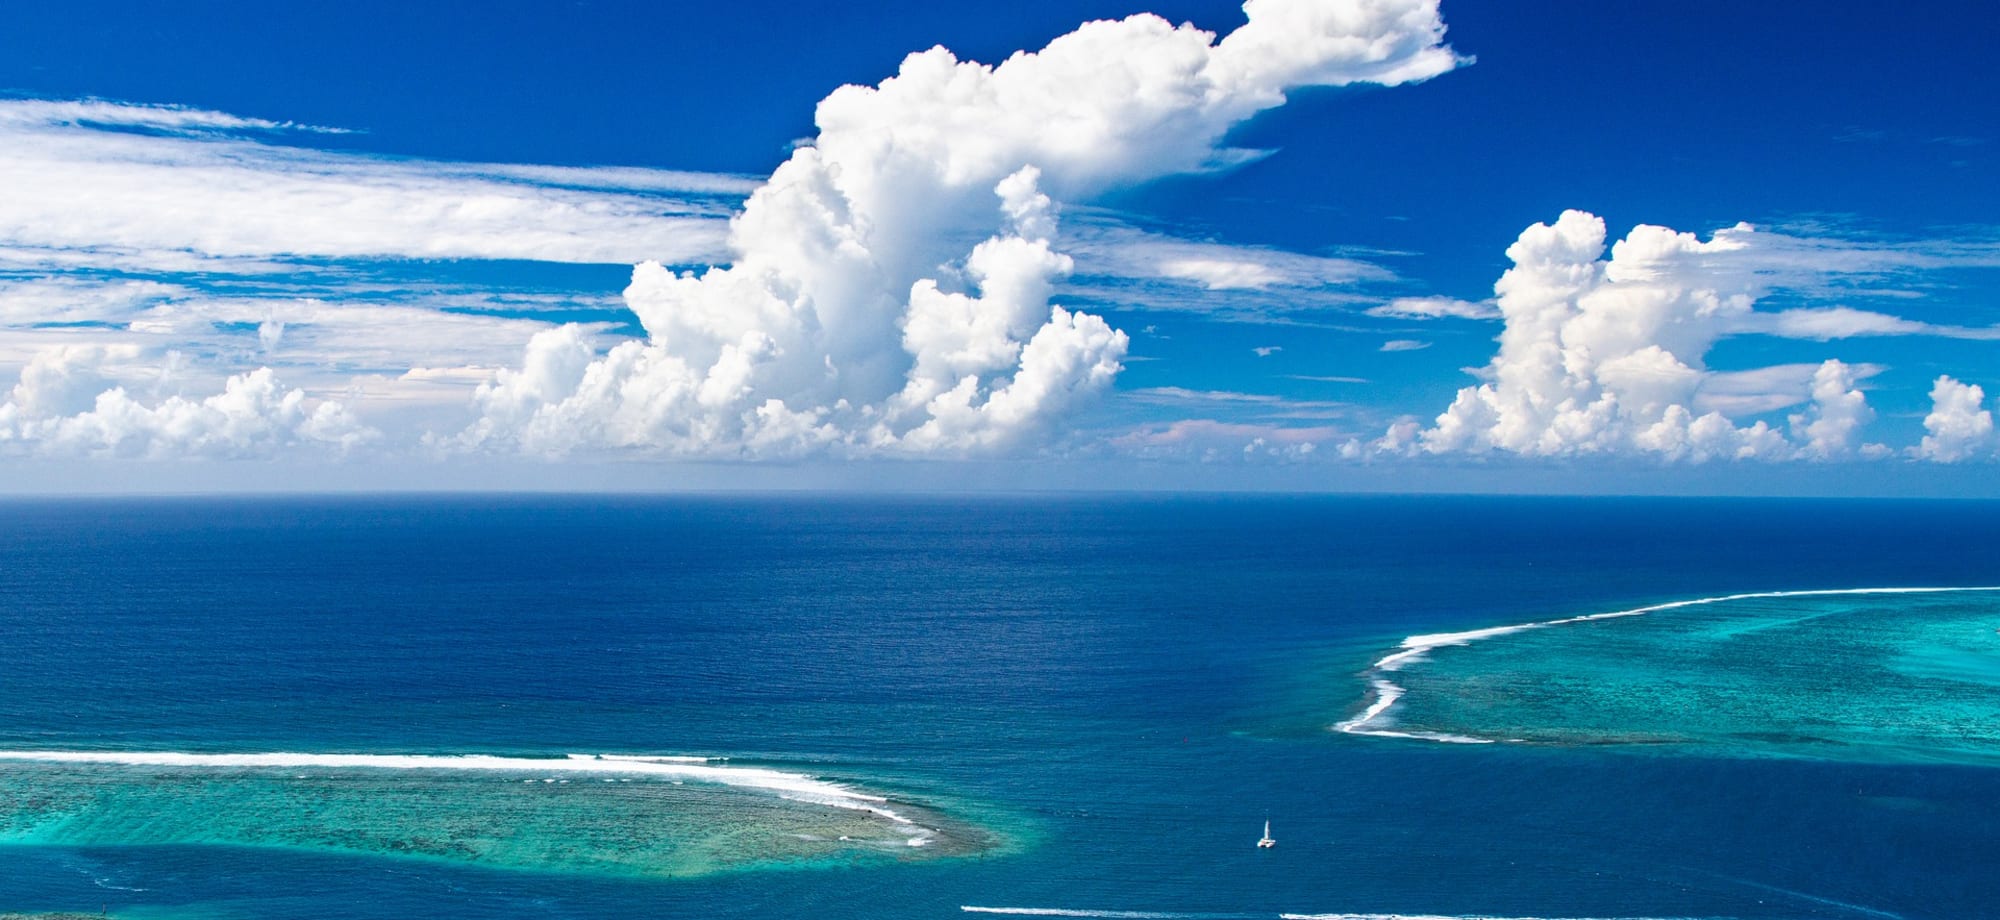 The blue ocean has pockets of turquoise waters and is under really white, fluffy clouds. 